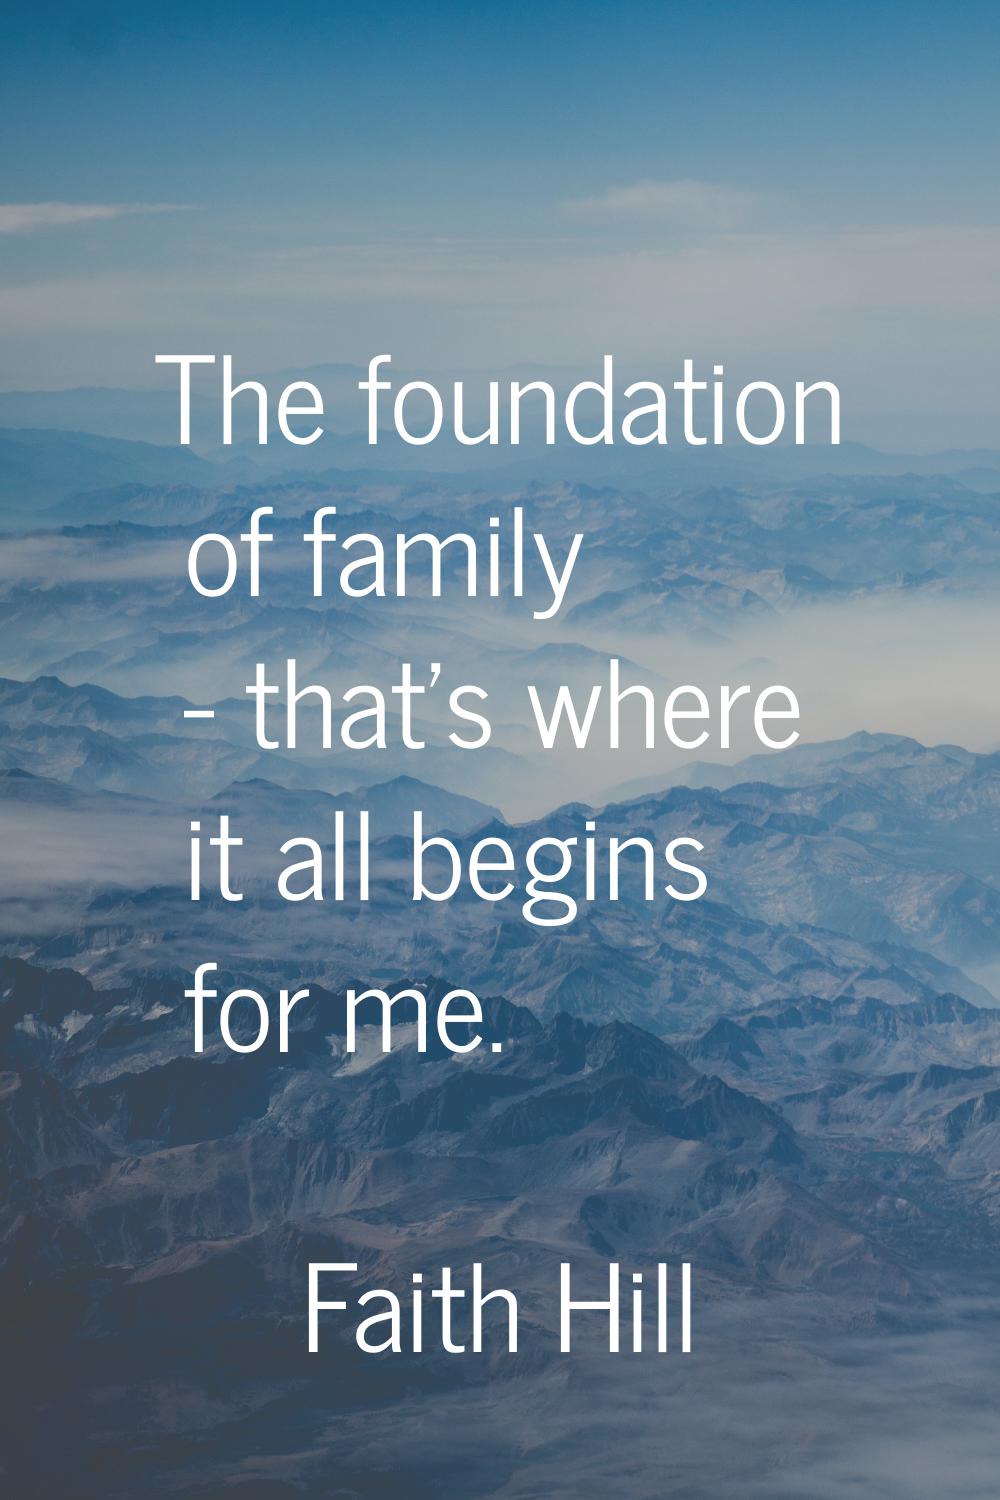 The foundation of family - that's where it all begins for me.